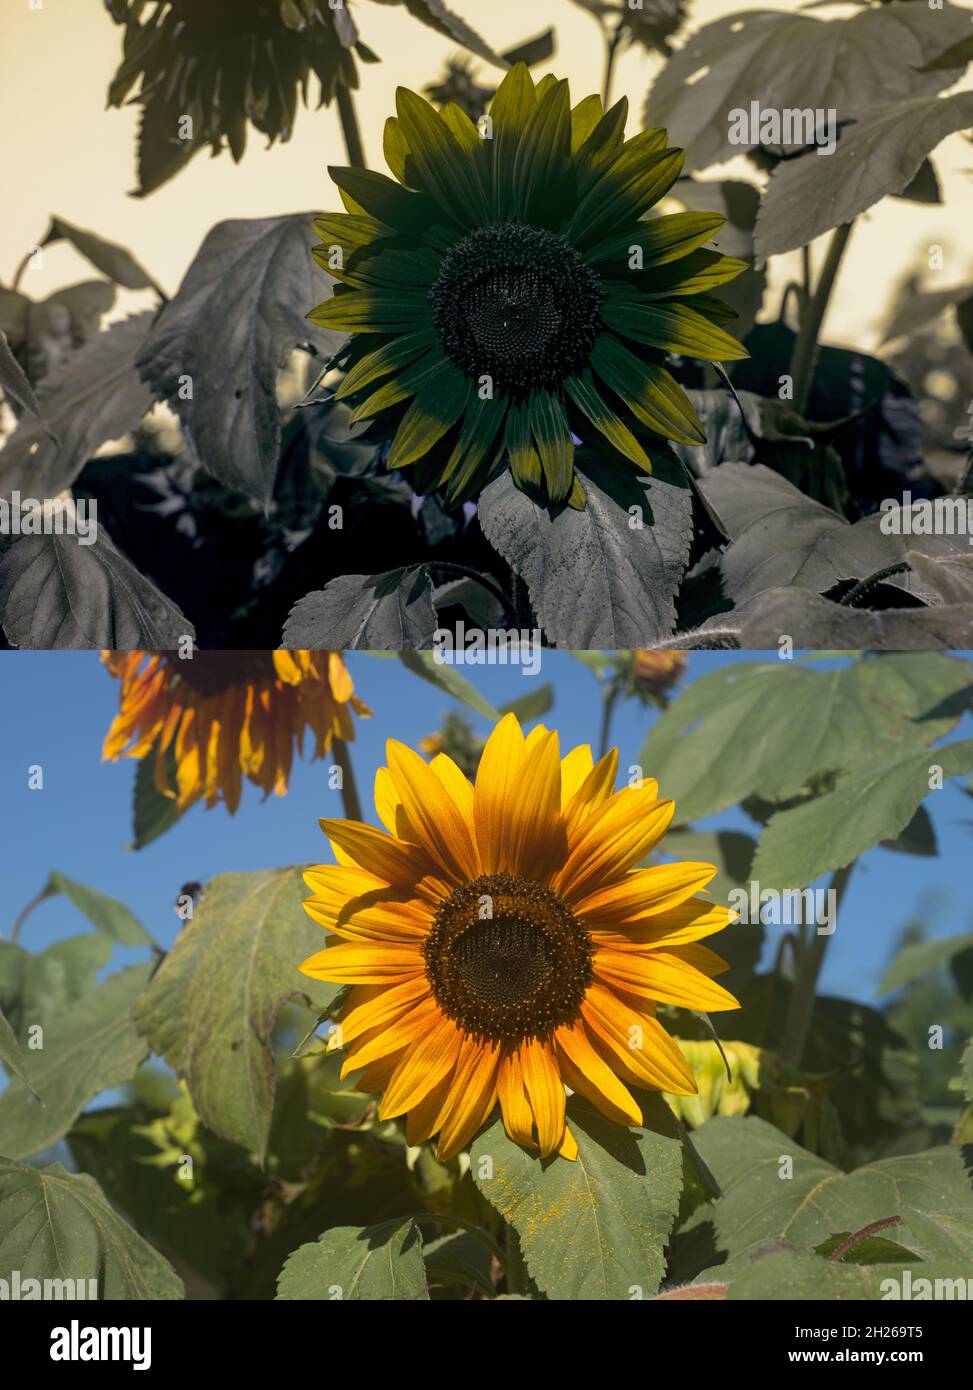 Comparison normal daylight and UV ultraviolet reflected light on sunflower, aster daisy, coneflower rudbeckia showing invisible patterns to humans Stock Photo